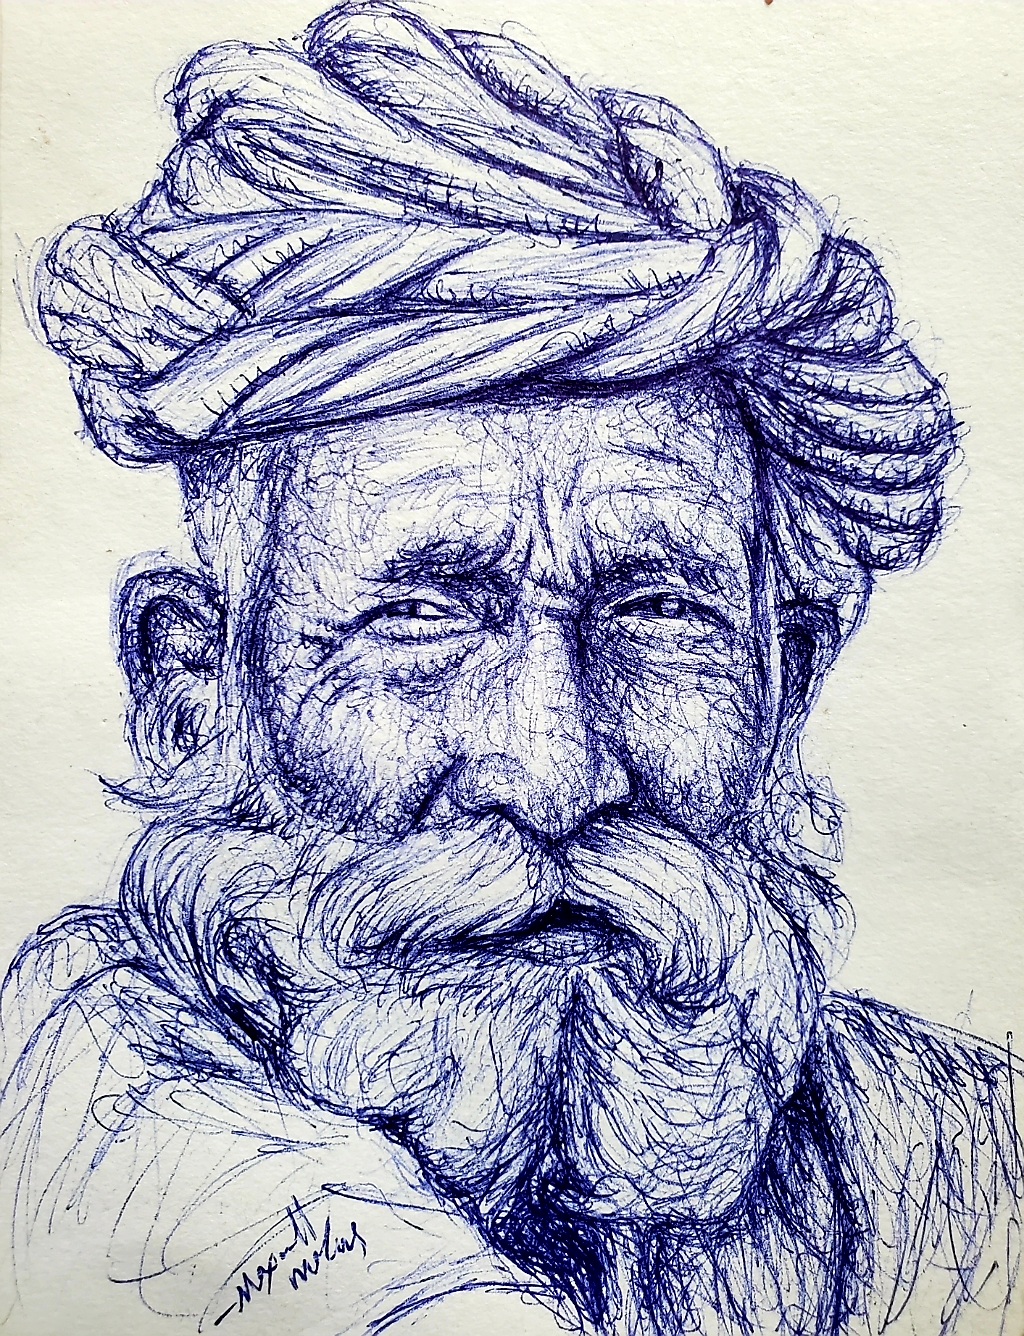 Old man portrait | Old man portrait, Sketches of people, Person sketch